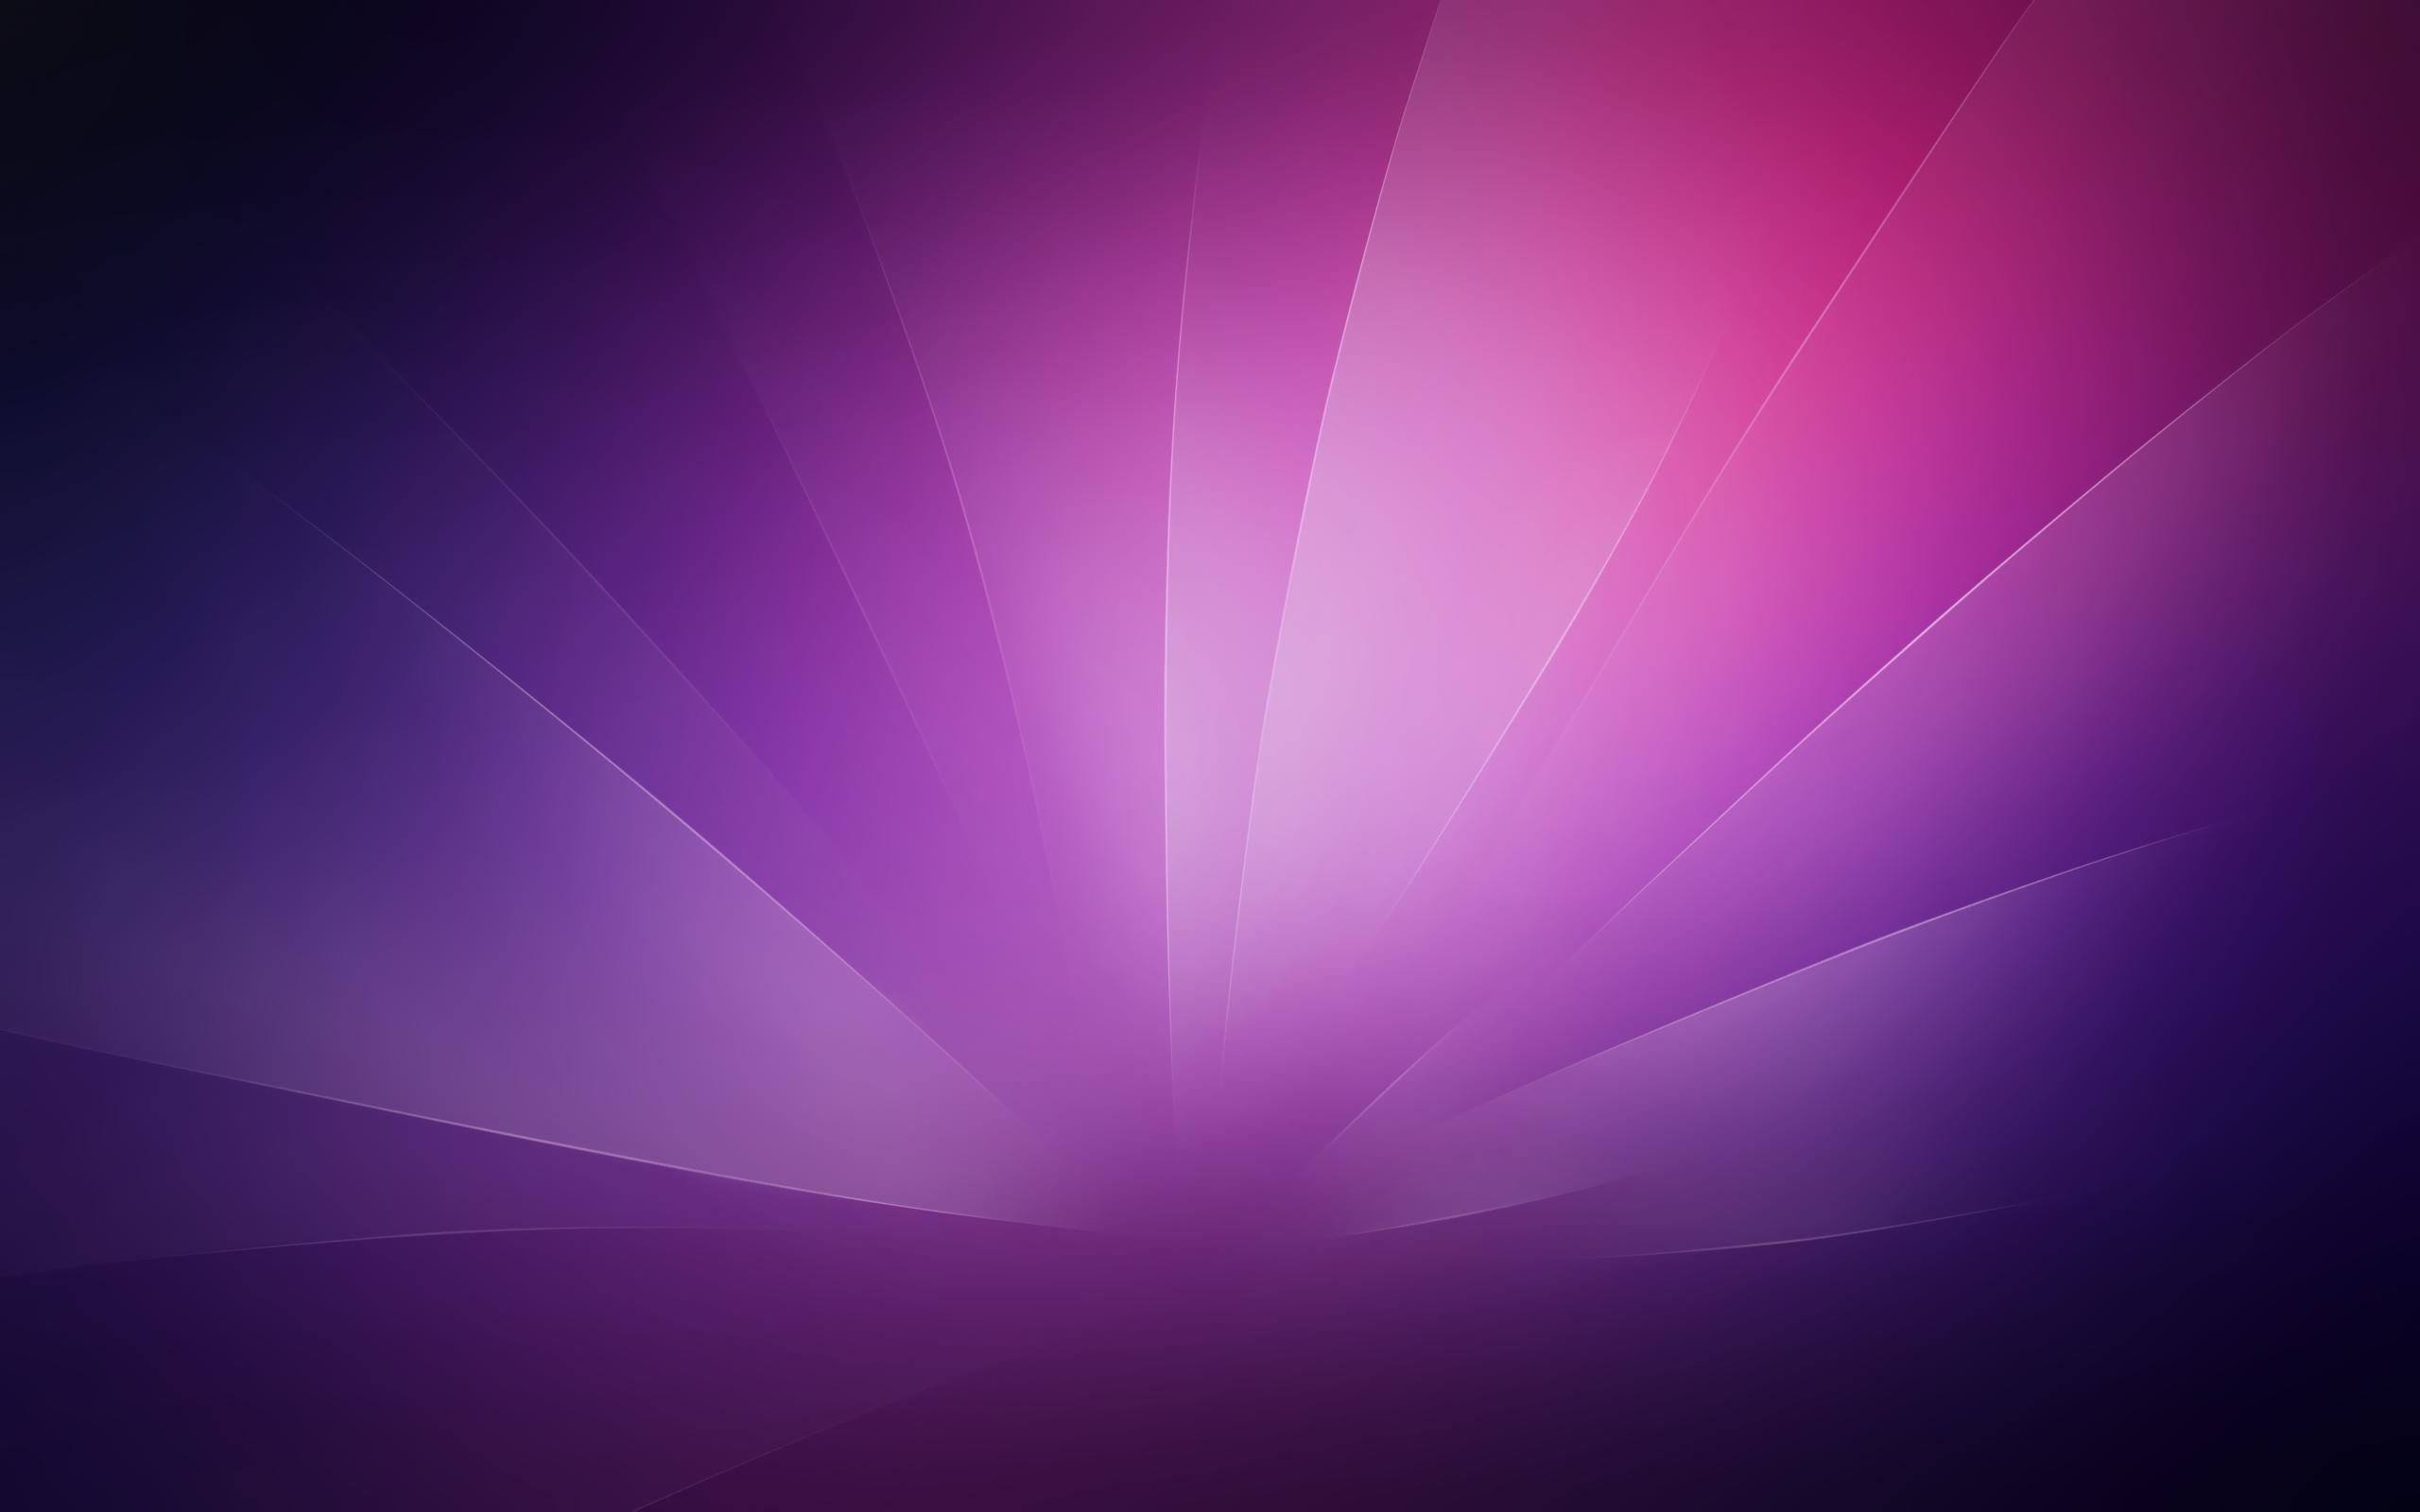 Purple and Pink Backgrounds (62+ images)